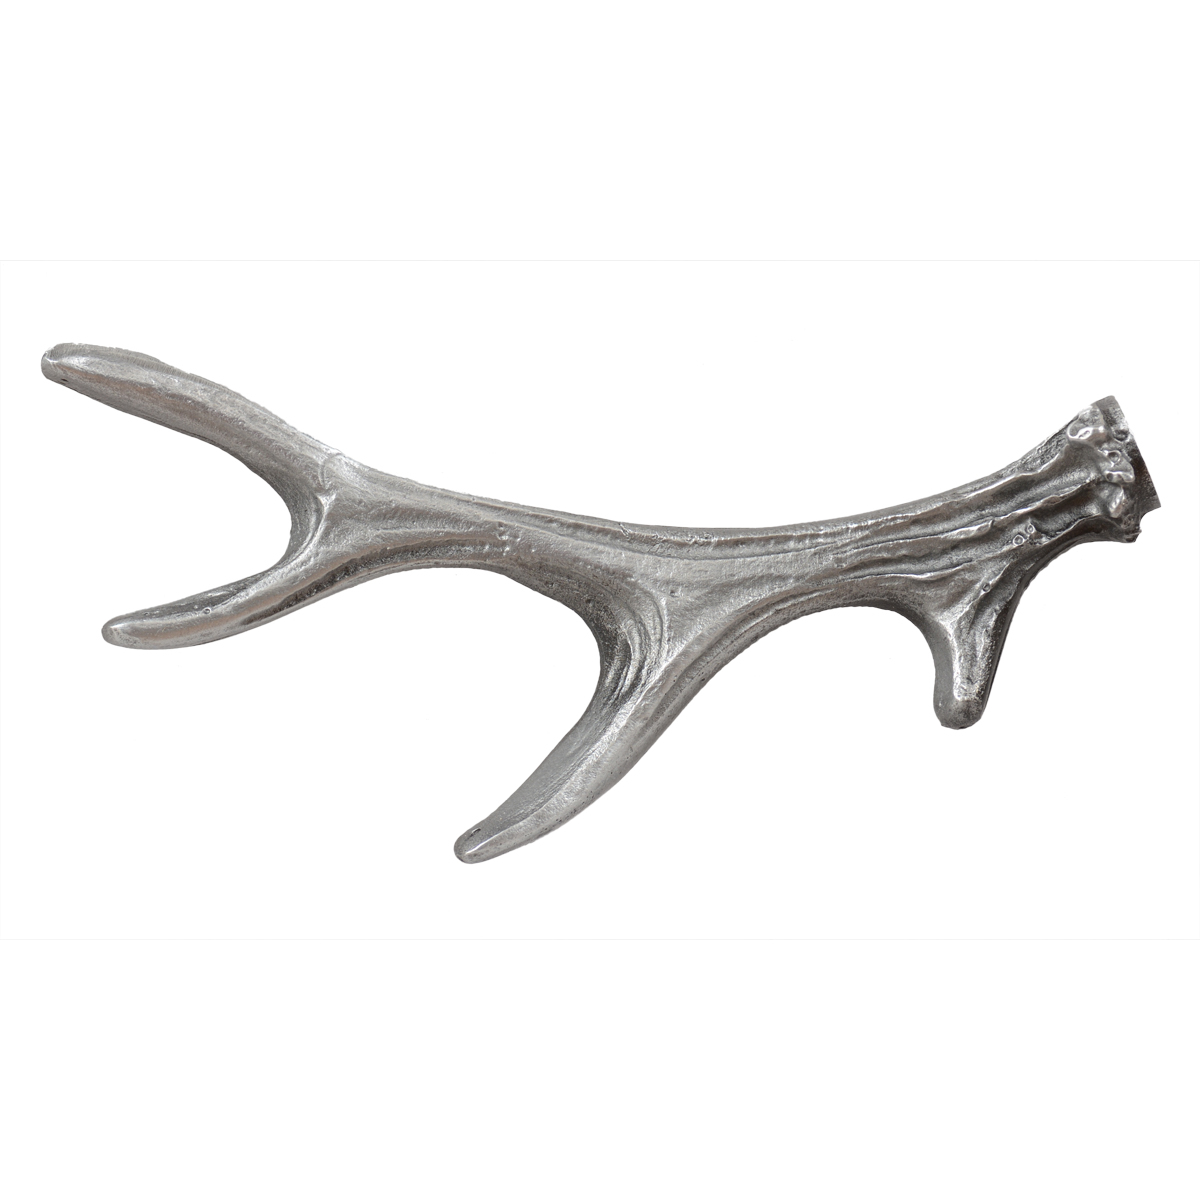 Antler Cabinet Hardware At Black Forest Decor intended for sizing 1200 X 1200